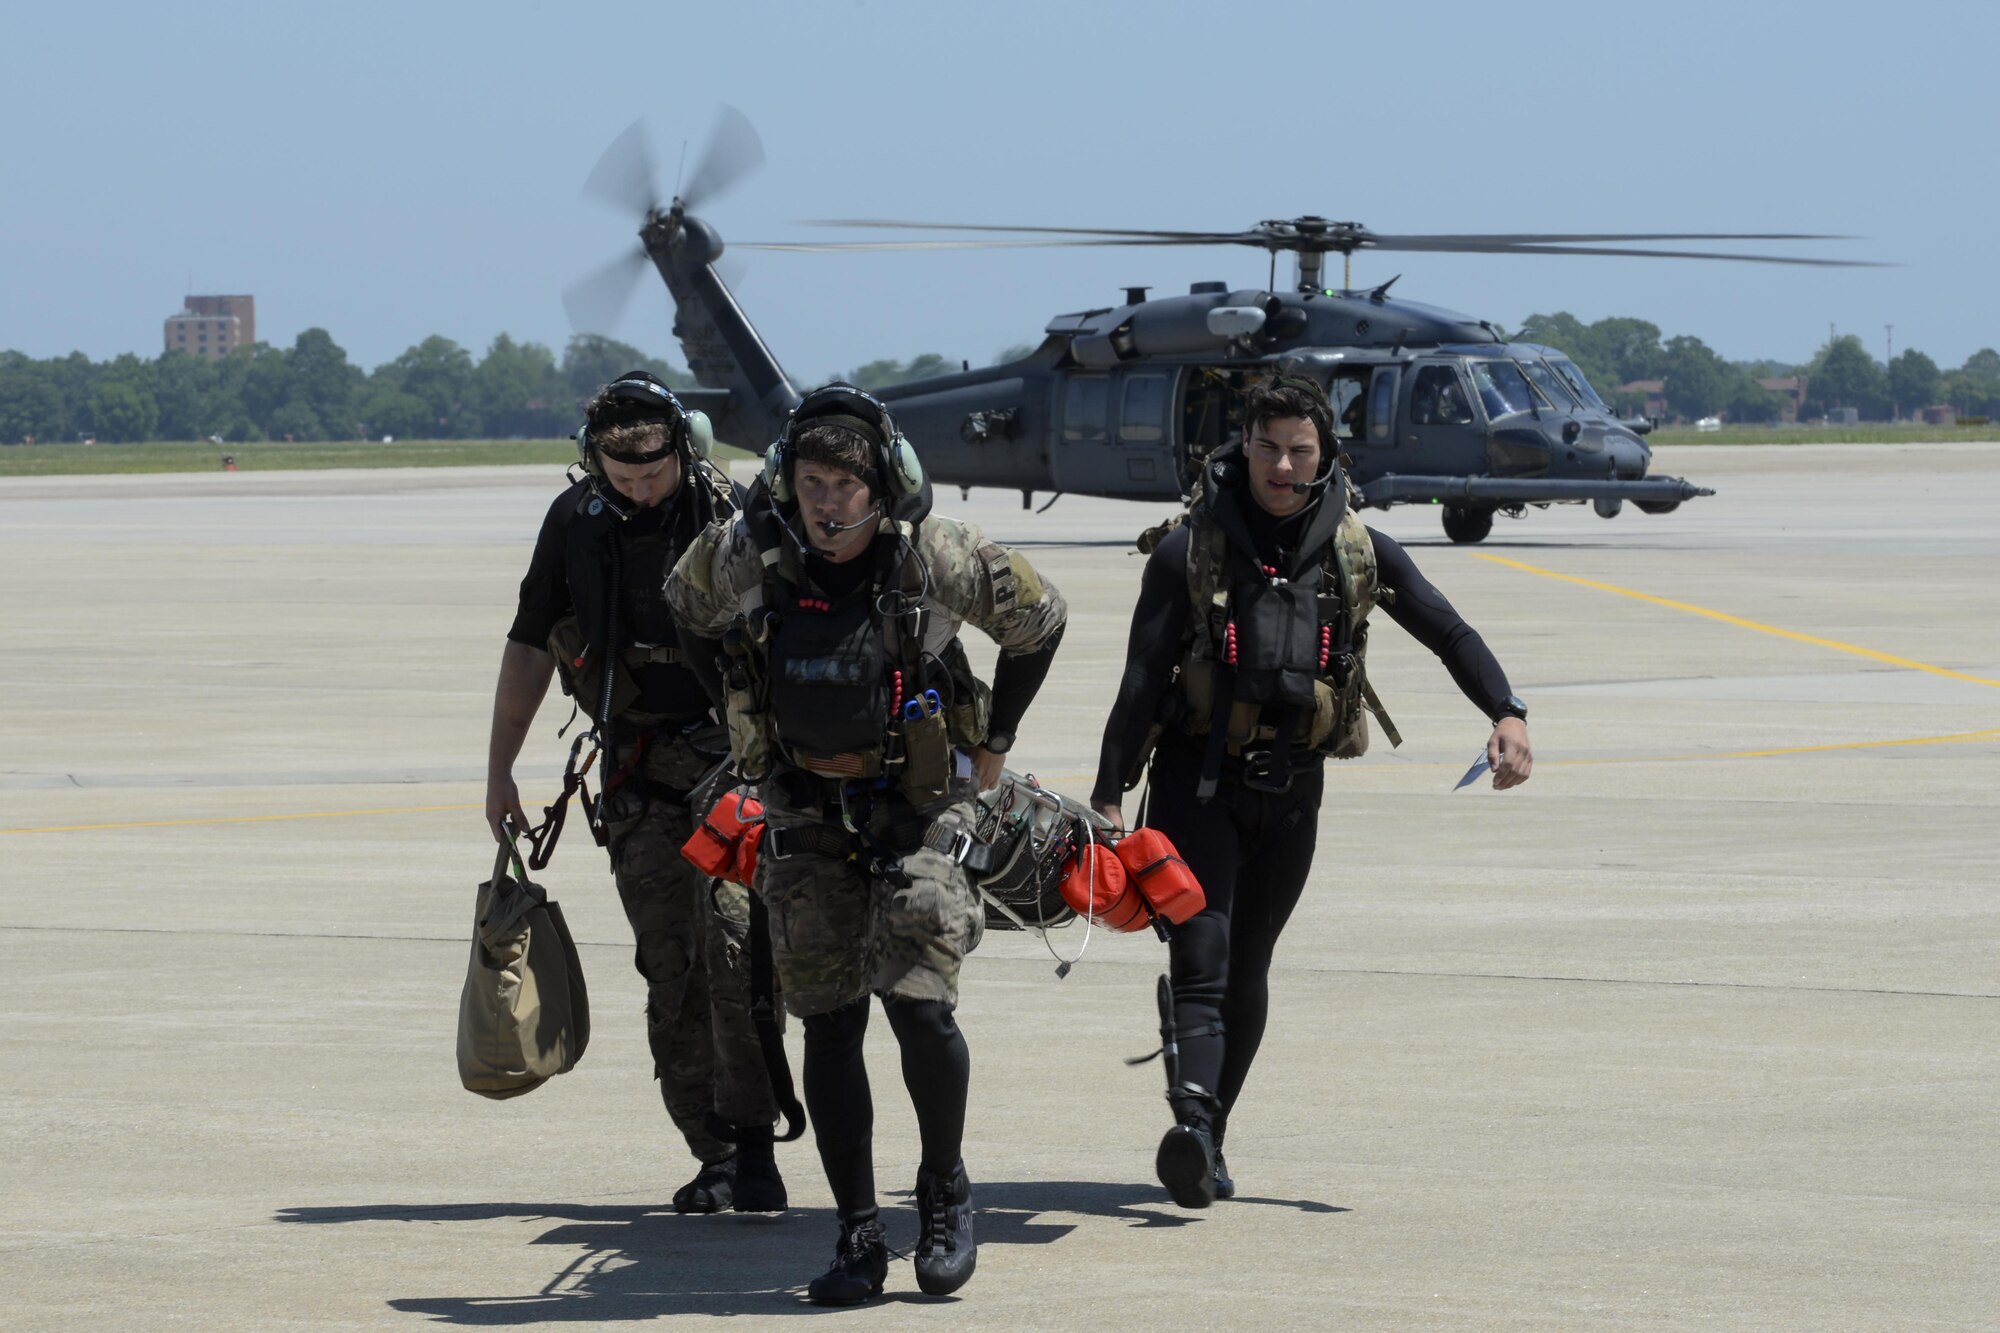 From left, Staff Sgt. Robert Hall, Staff Sgt. Travis Lester, and Senior Airman Eddie Judge, 38th Rescue Squadron pararescuemen assigned to Moody Air Force Base, Ga., carry an Airman with simulated injuries toward a 3d Airlift Squadron C-17 Globemaster III May 17, 2017, during Exercise RAPID RESCUE at Langley AFB, Va. The C-17 was prepped and ready to takeoff for a simulated aeromedical evacuation flight when the search and rescue team arrived. (U.S. Air Force photo by Senior Airman Aaron J. Jenne)